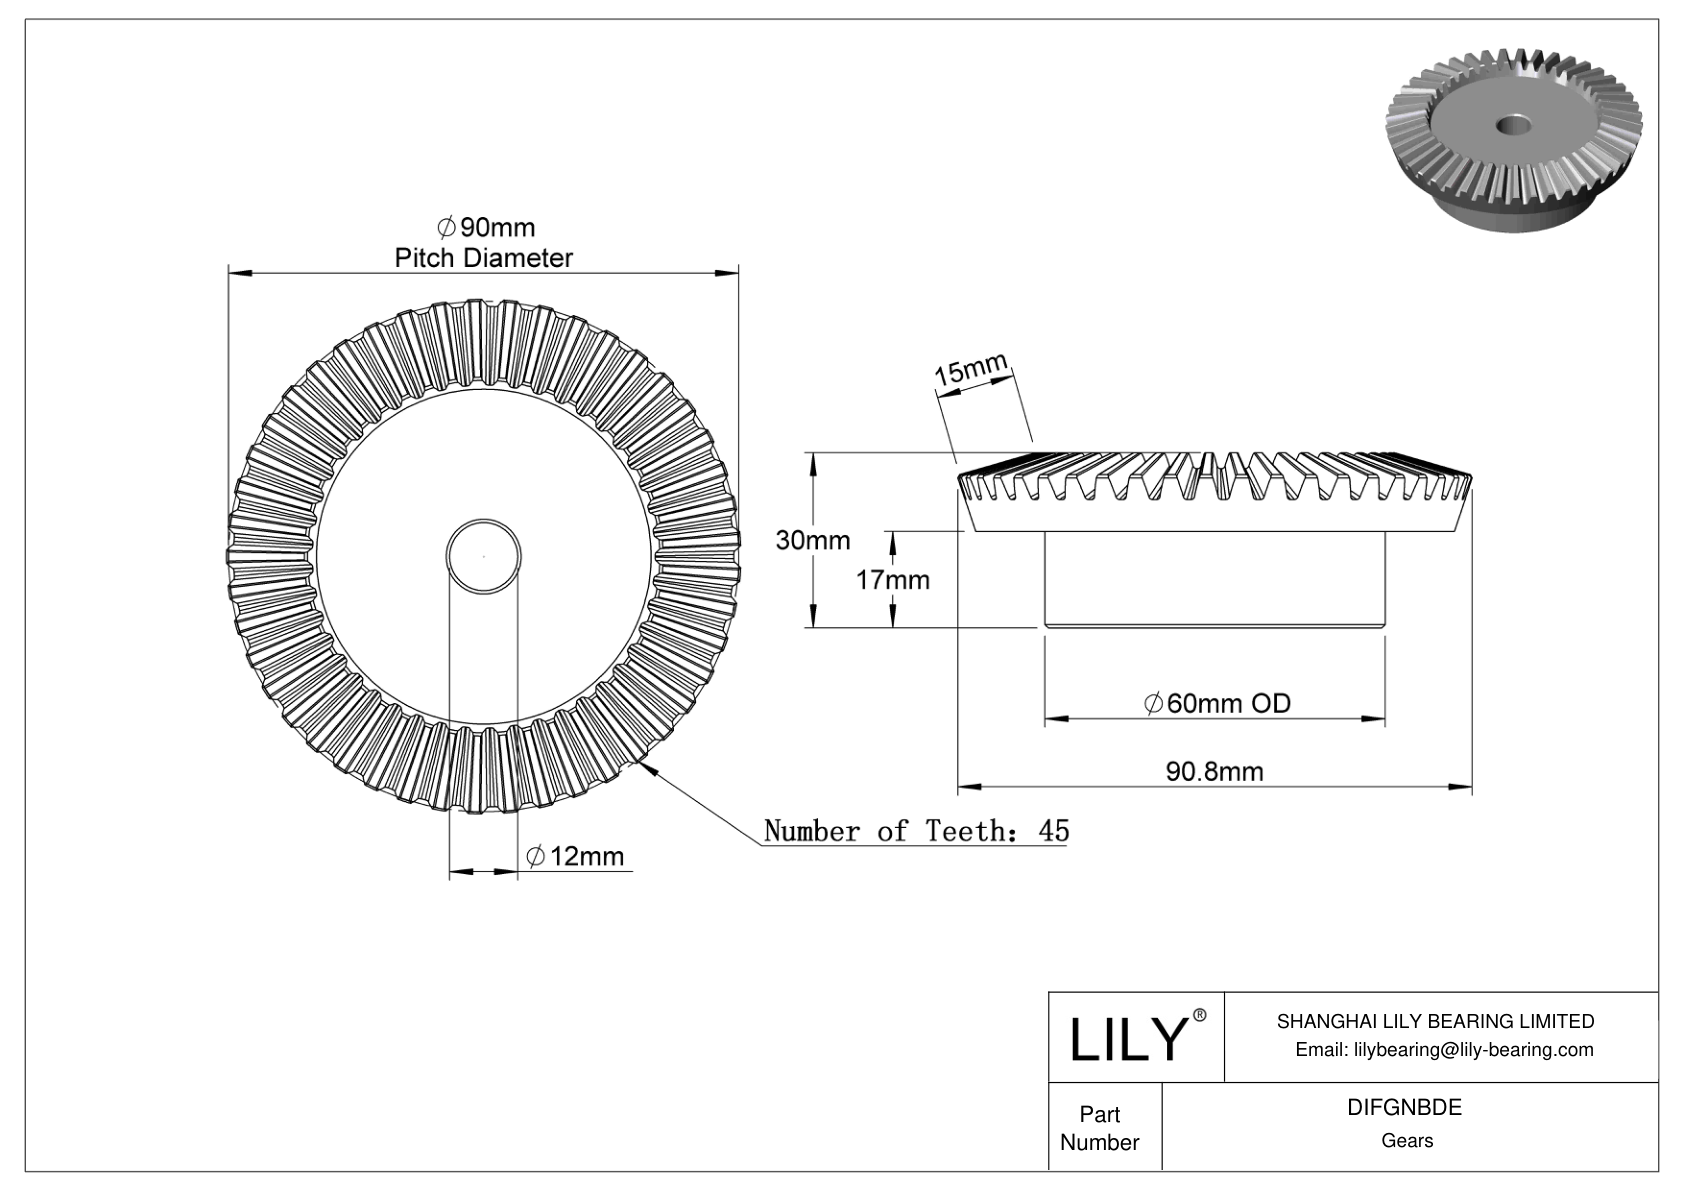 DIFGNBDE Gears cad drawing